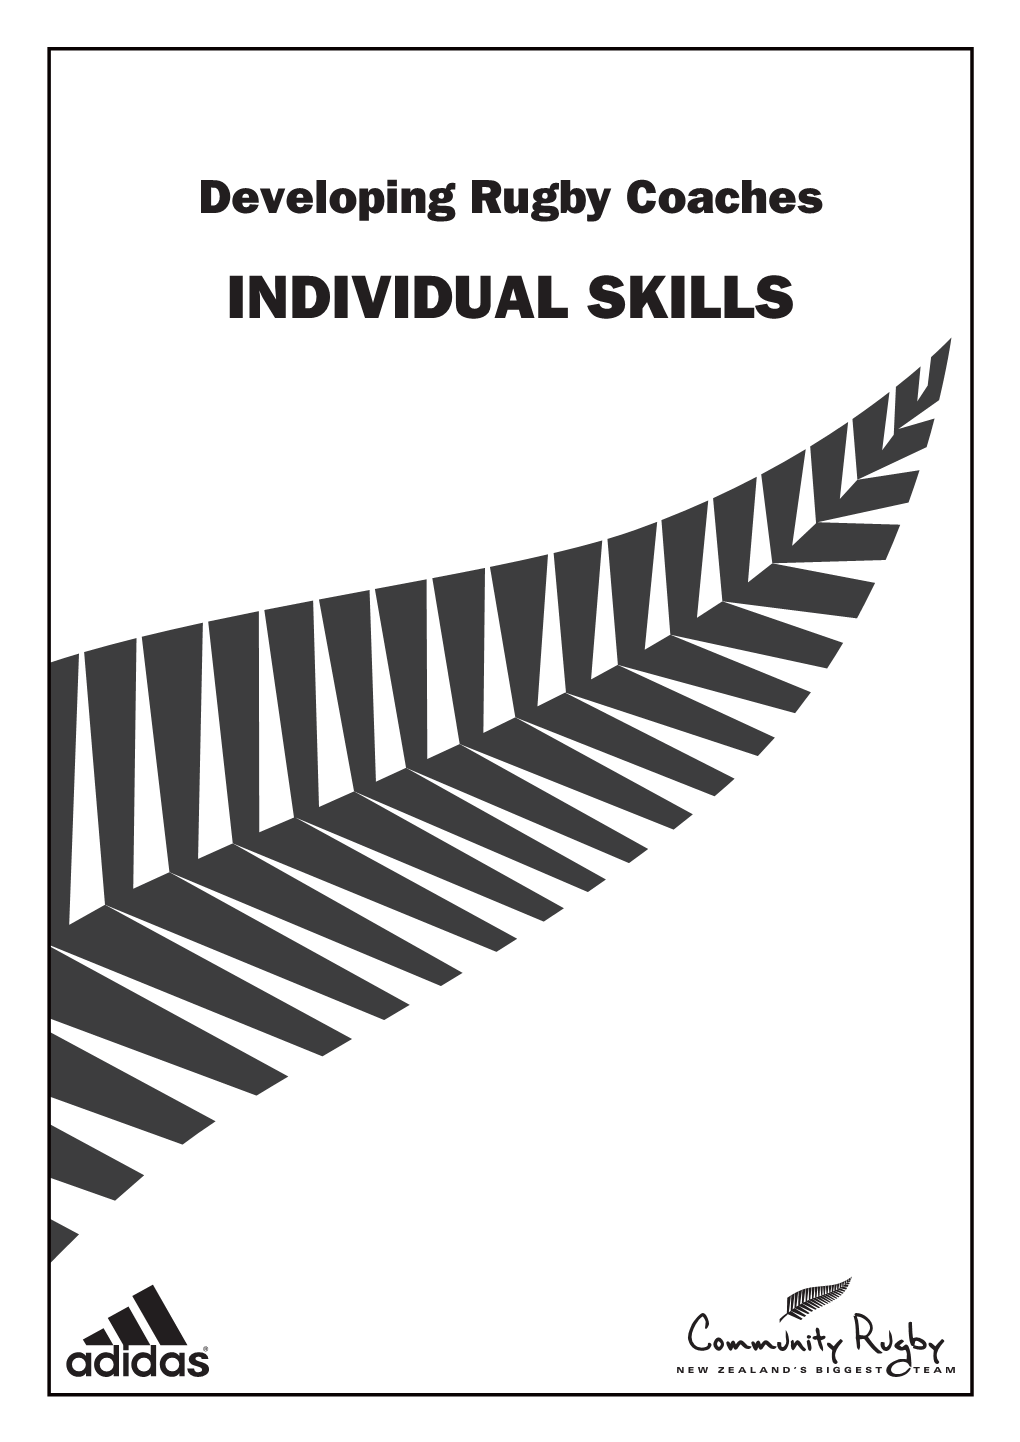 Developing Rugby Coaches INDIVIDUAL SKILLS